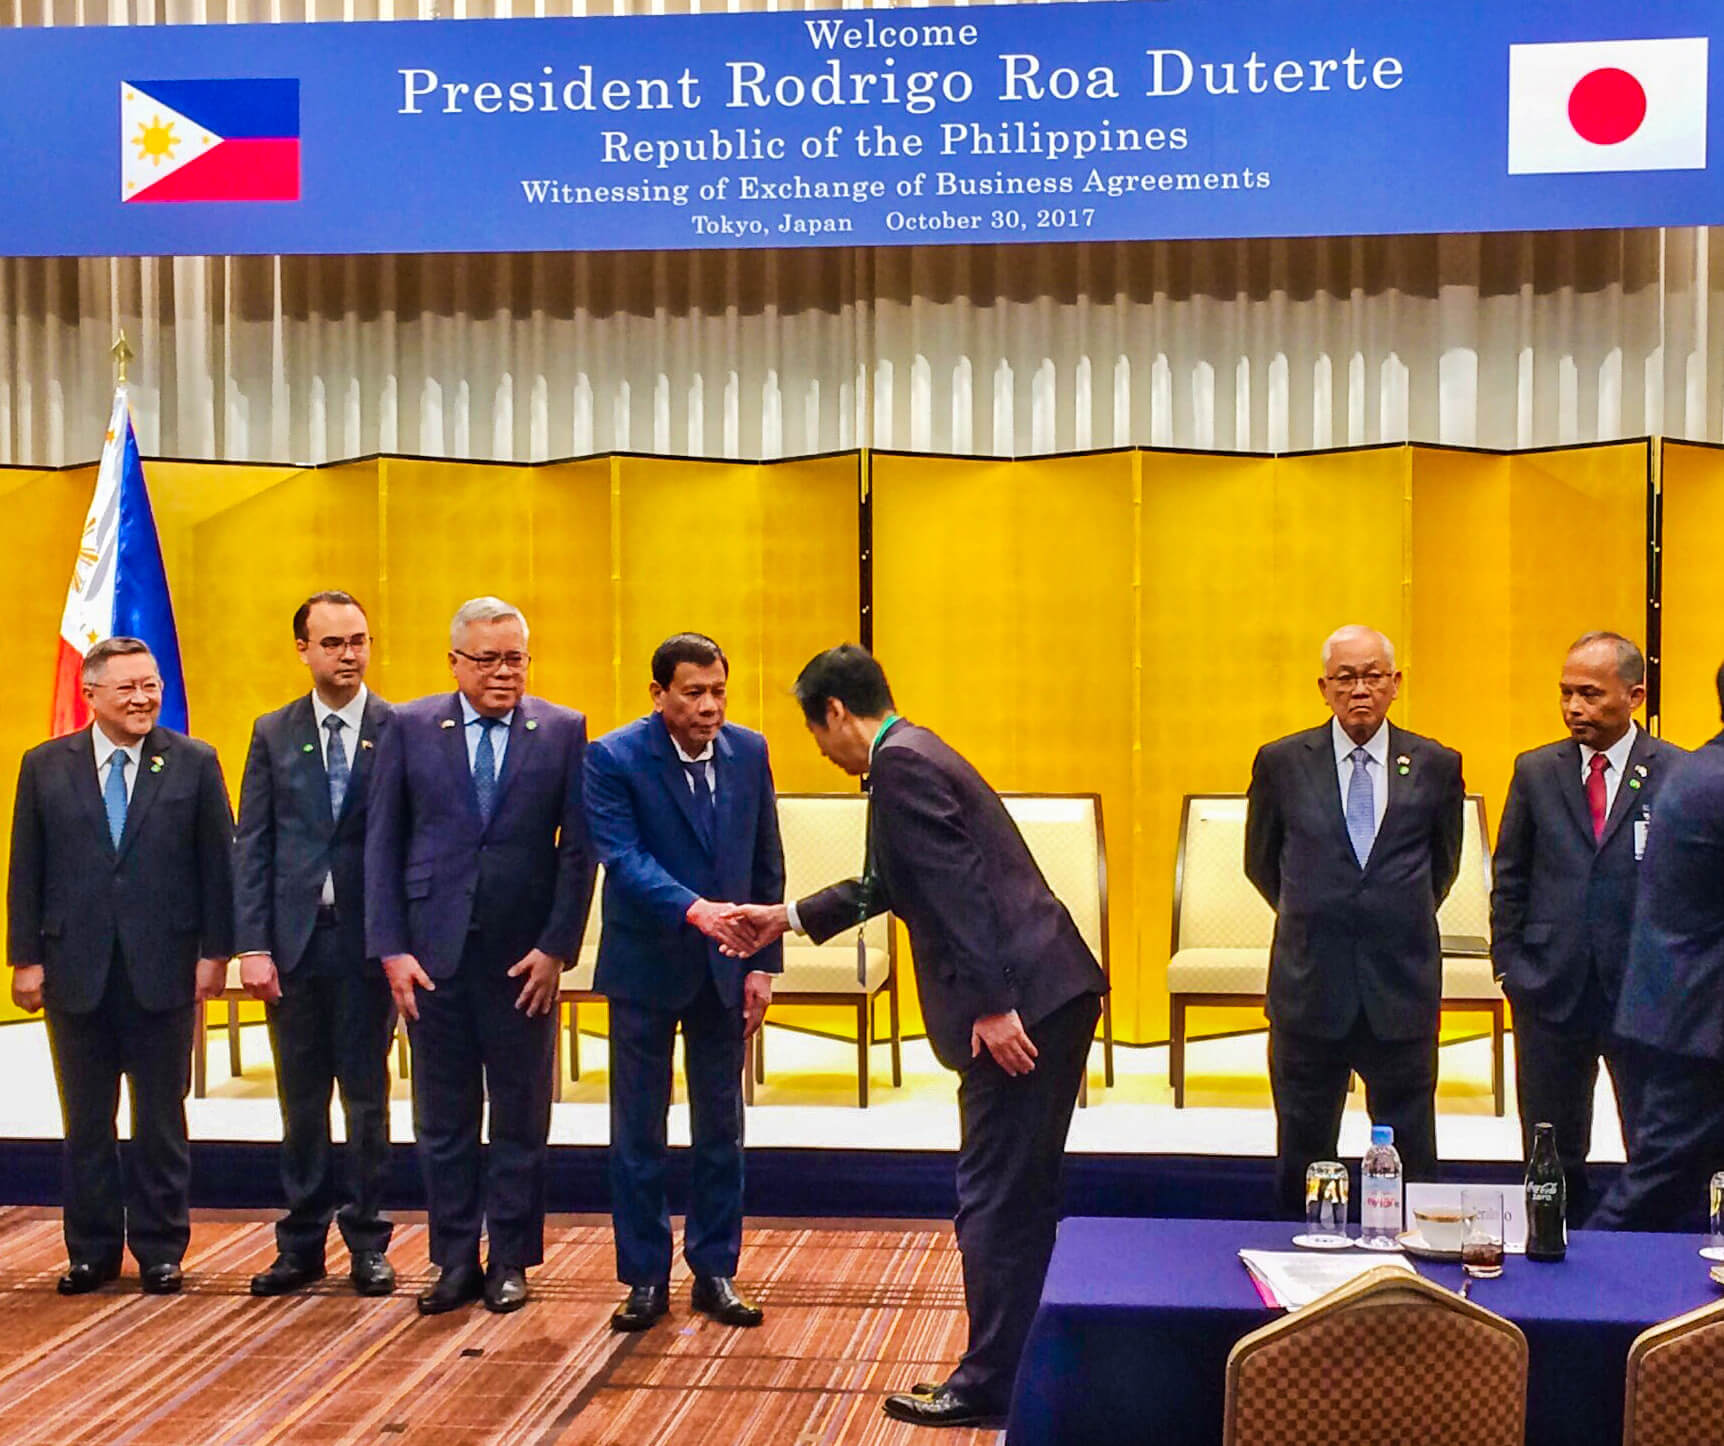 President Duterte with Ichiro Egami, Taiheiyo Cement Corporation director and managing executive officer, during his visit to Tokyo last Oct. 30, 2017. With them are (from left) then Economic Planning Secretary Ernesto M. Pernia, then Foreign Affairs Secretary Alan Peter S. Cayetano and other Japanese business leaders.